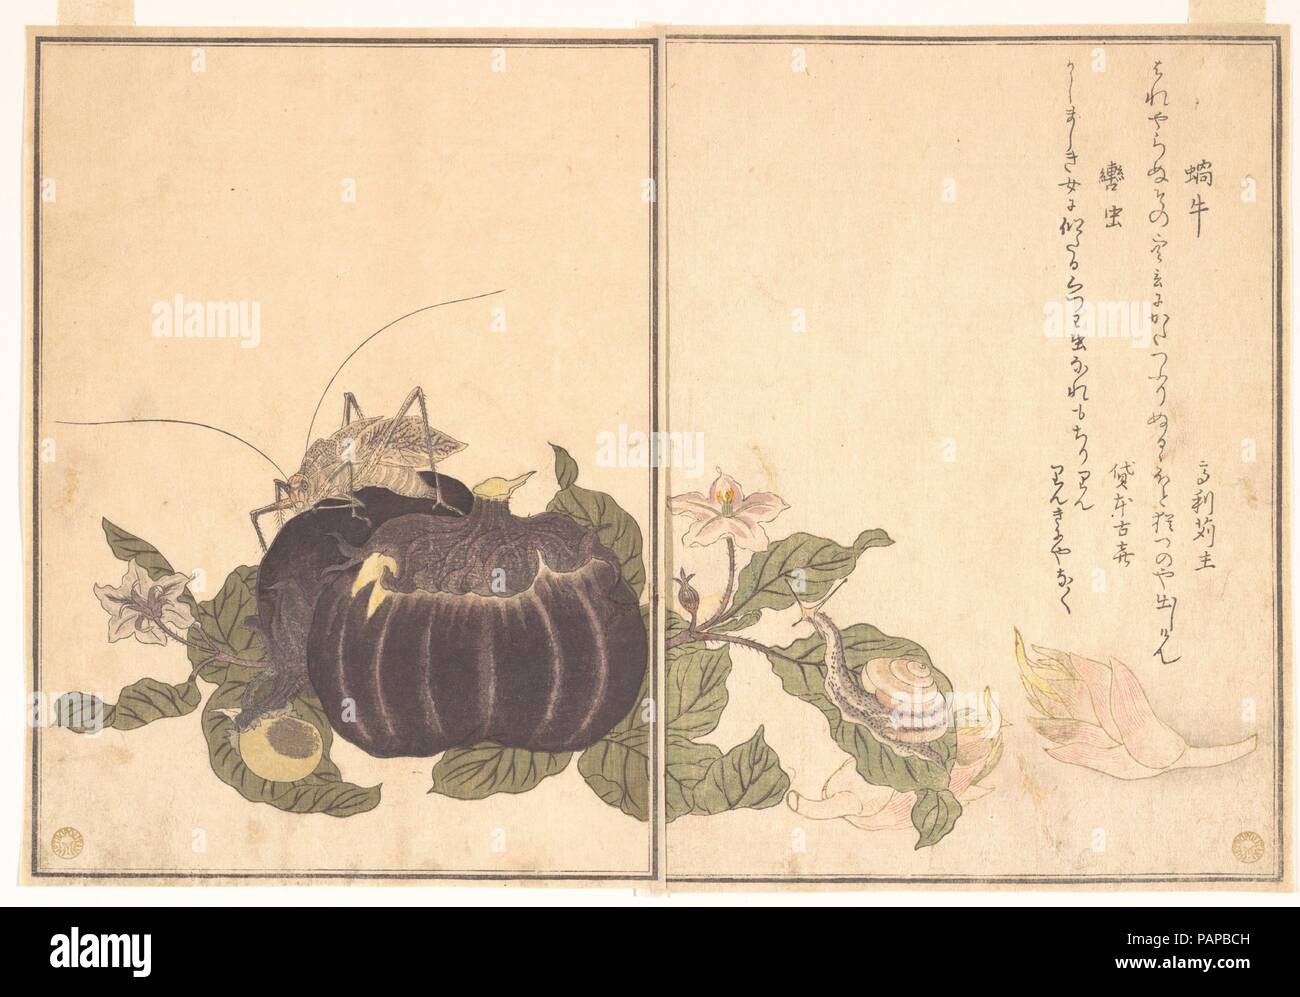 Land Snail (Katatsumuri); Giant Katydid (Kutsuwamushi), from the Picture Book of Crawling Creatures (Ehon mushi erami). Artist: Kitagawa Utamaro (Japanese, ca. 1754-1806). Culture: Japan. Dimensions: 10 1/2 x 7 7/32 in. (26.7 x 18.4 cm). Date: 1788.  Ehon mushi erami (Picture Book of Crawling Creatures) is illustrated with fifteen designs of insects and other garden creatures by Utamaro. Published by Tsutaya Juzaburo , the poems were selected and introduced by a preface written by the poet and scholar Yadoya no Meshimori (Rokujuen; 1753-1830), who later became head of the influential Go-gawa p Stock Photo